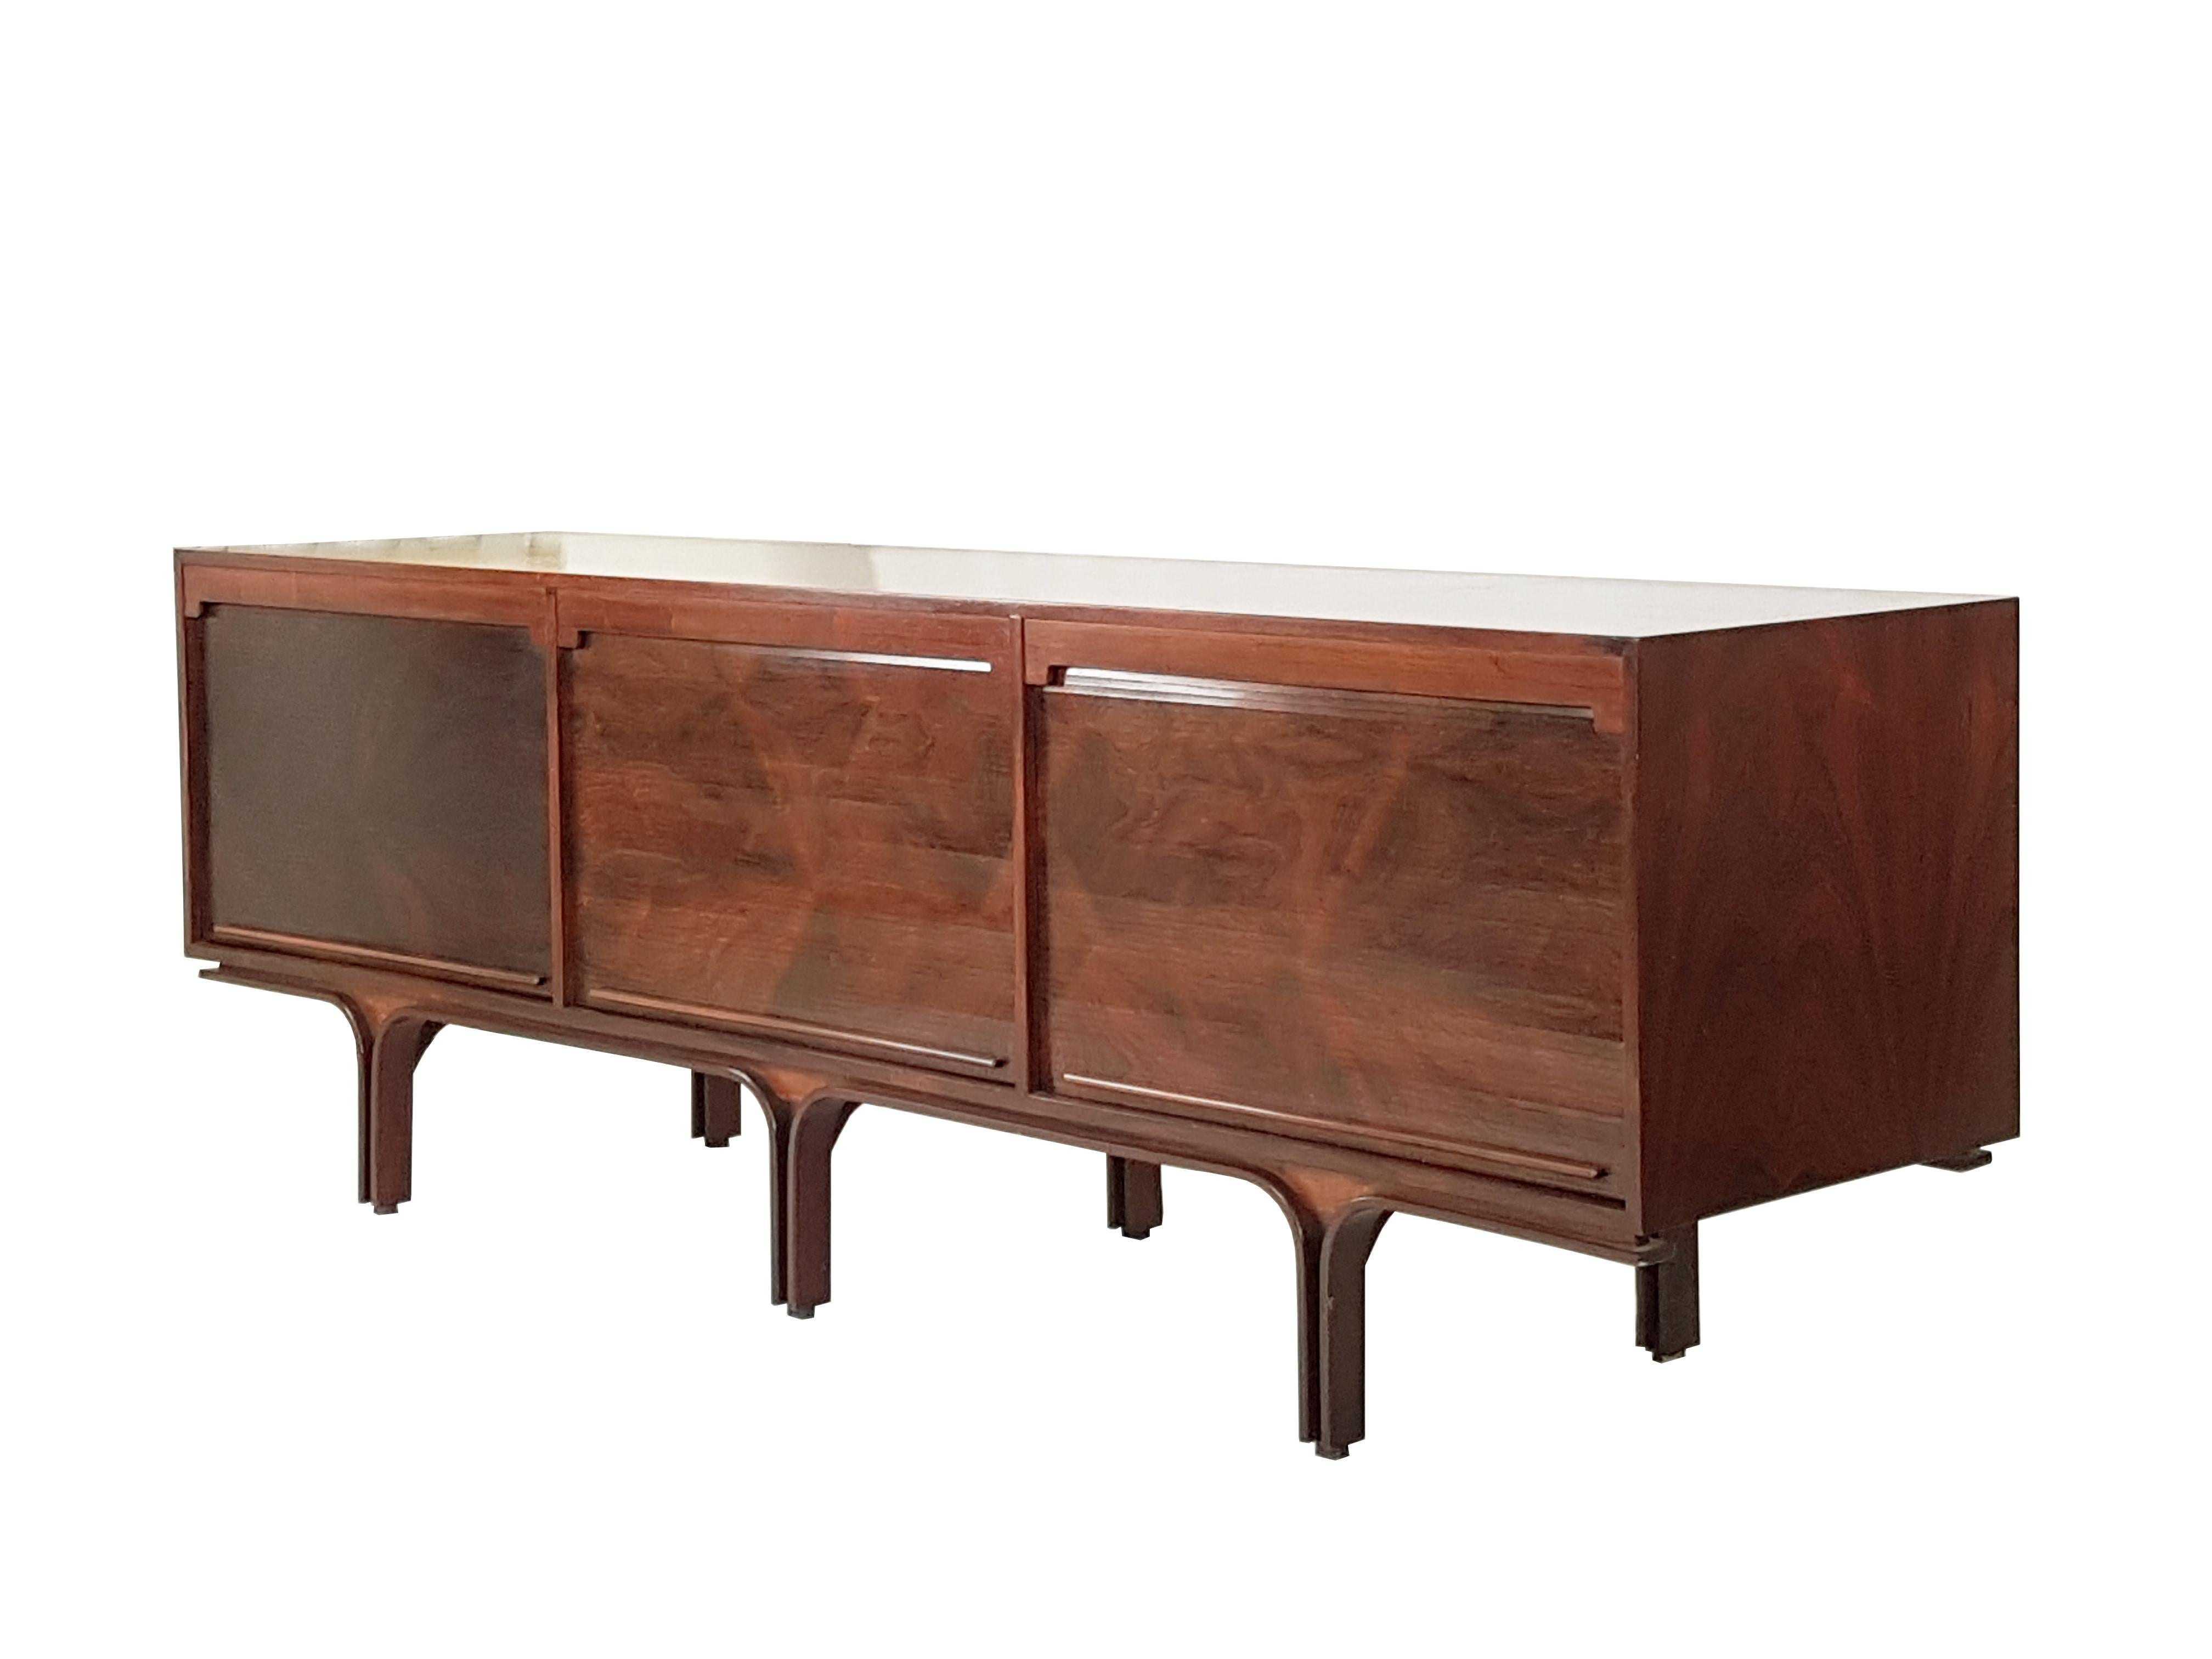 This Rio rosewood sideboard was designed by Gianfranco Frattini for Bernini in 1957. It is composed by 3 storage units with 2 shelves and 1 set of drawers. It features an useful vertical tambour doors system which allows you to hide the units and